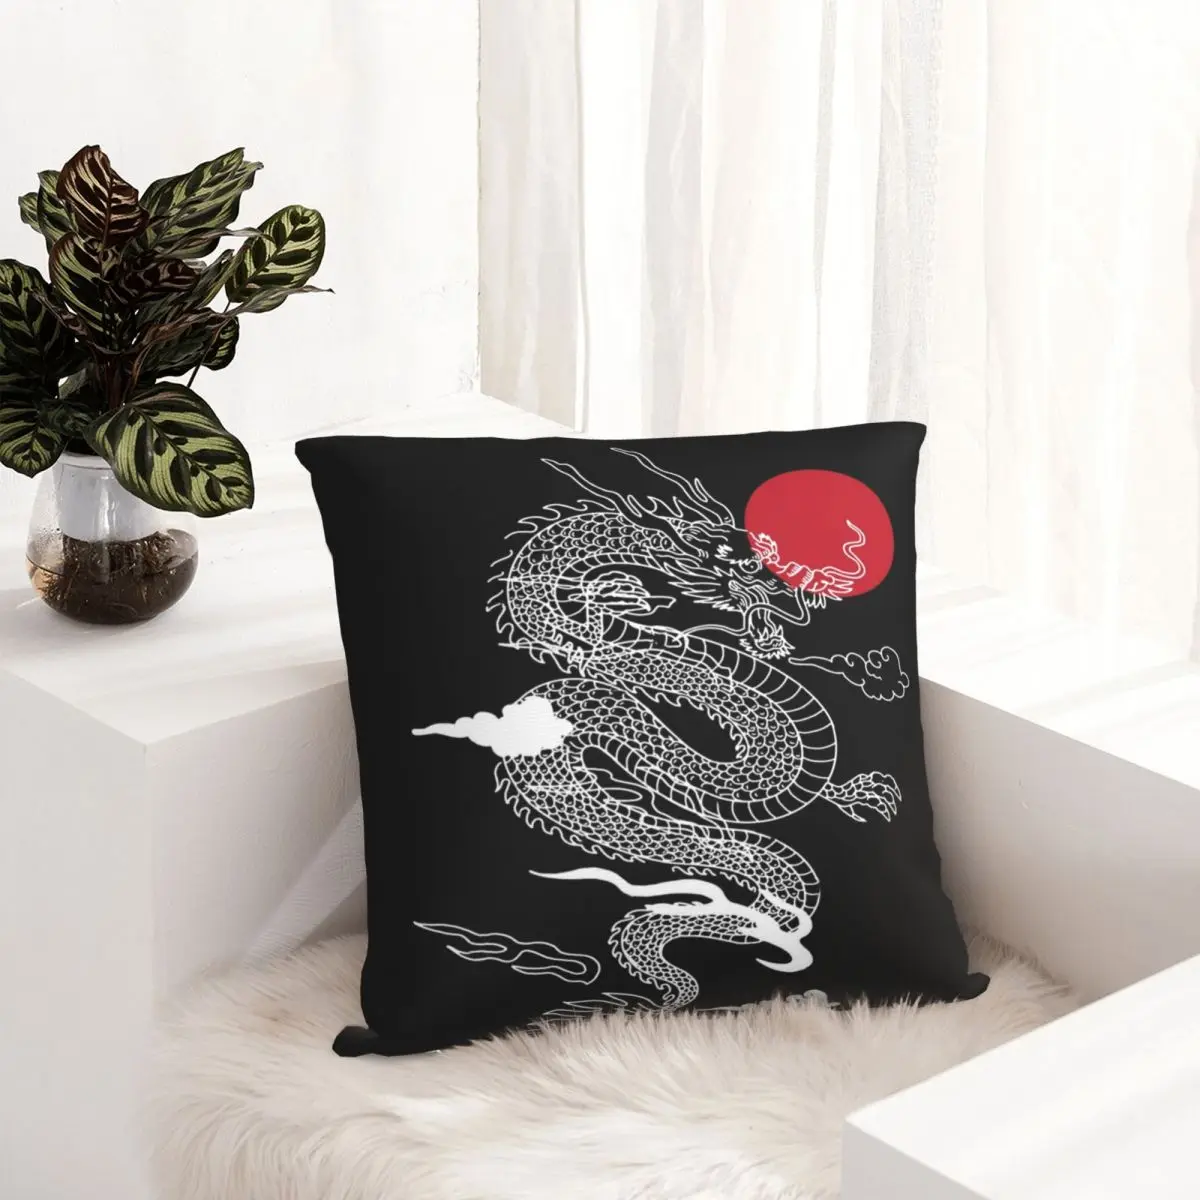 Japanese Dragon Asia Fantasy Square Pillowcase Cushion Cover Creative Zip Home Decorative Throw Pillow Case for Car Simple images - 6